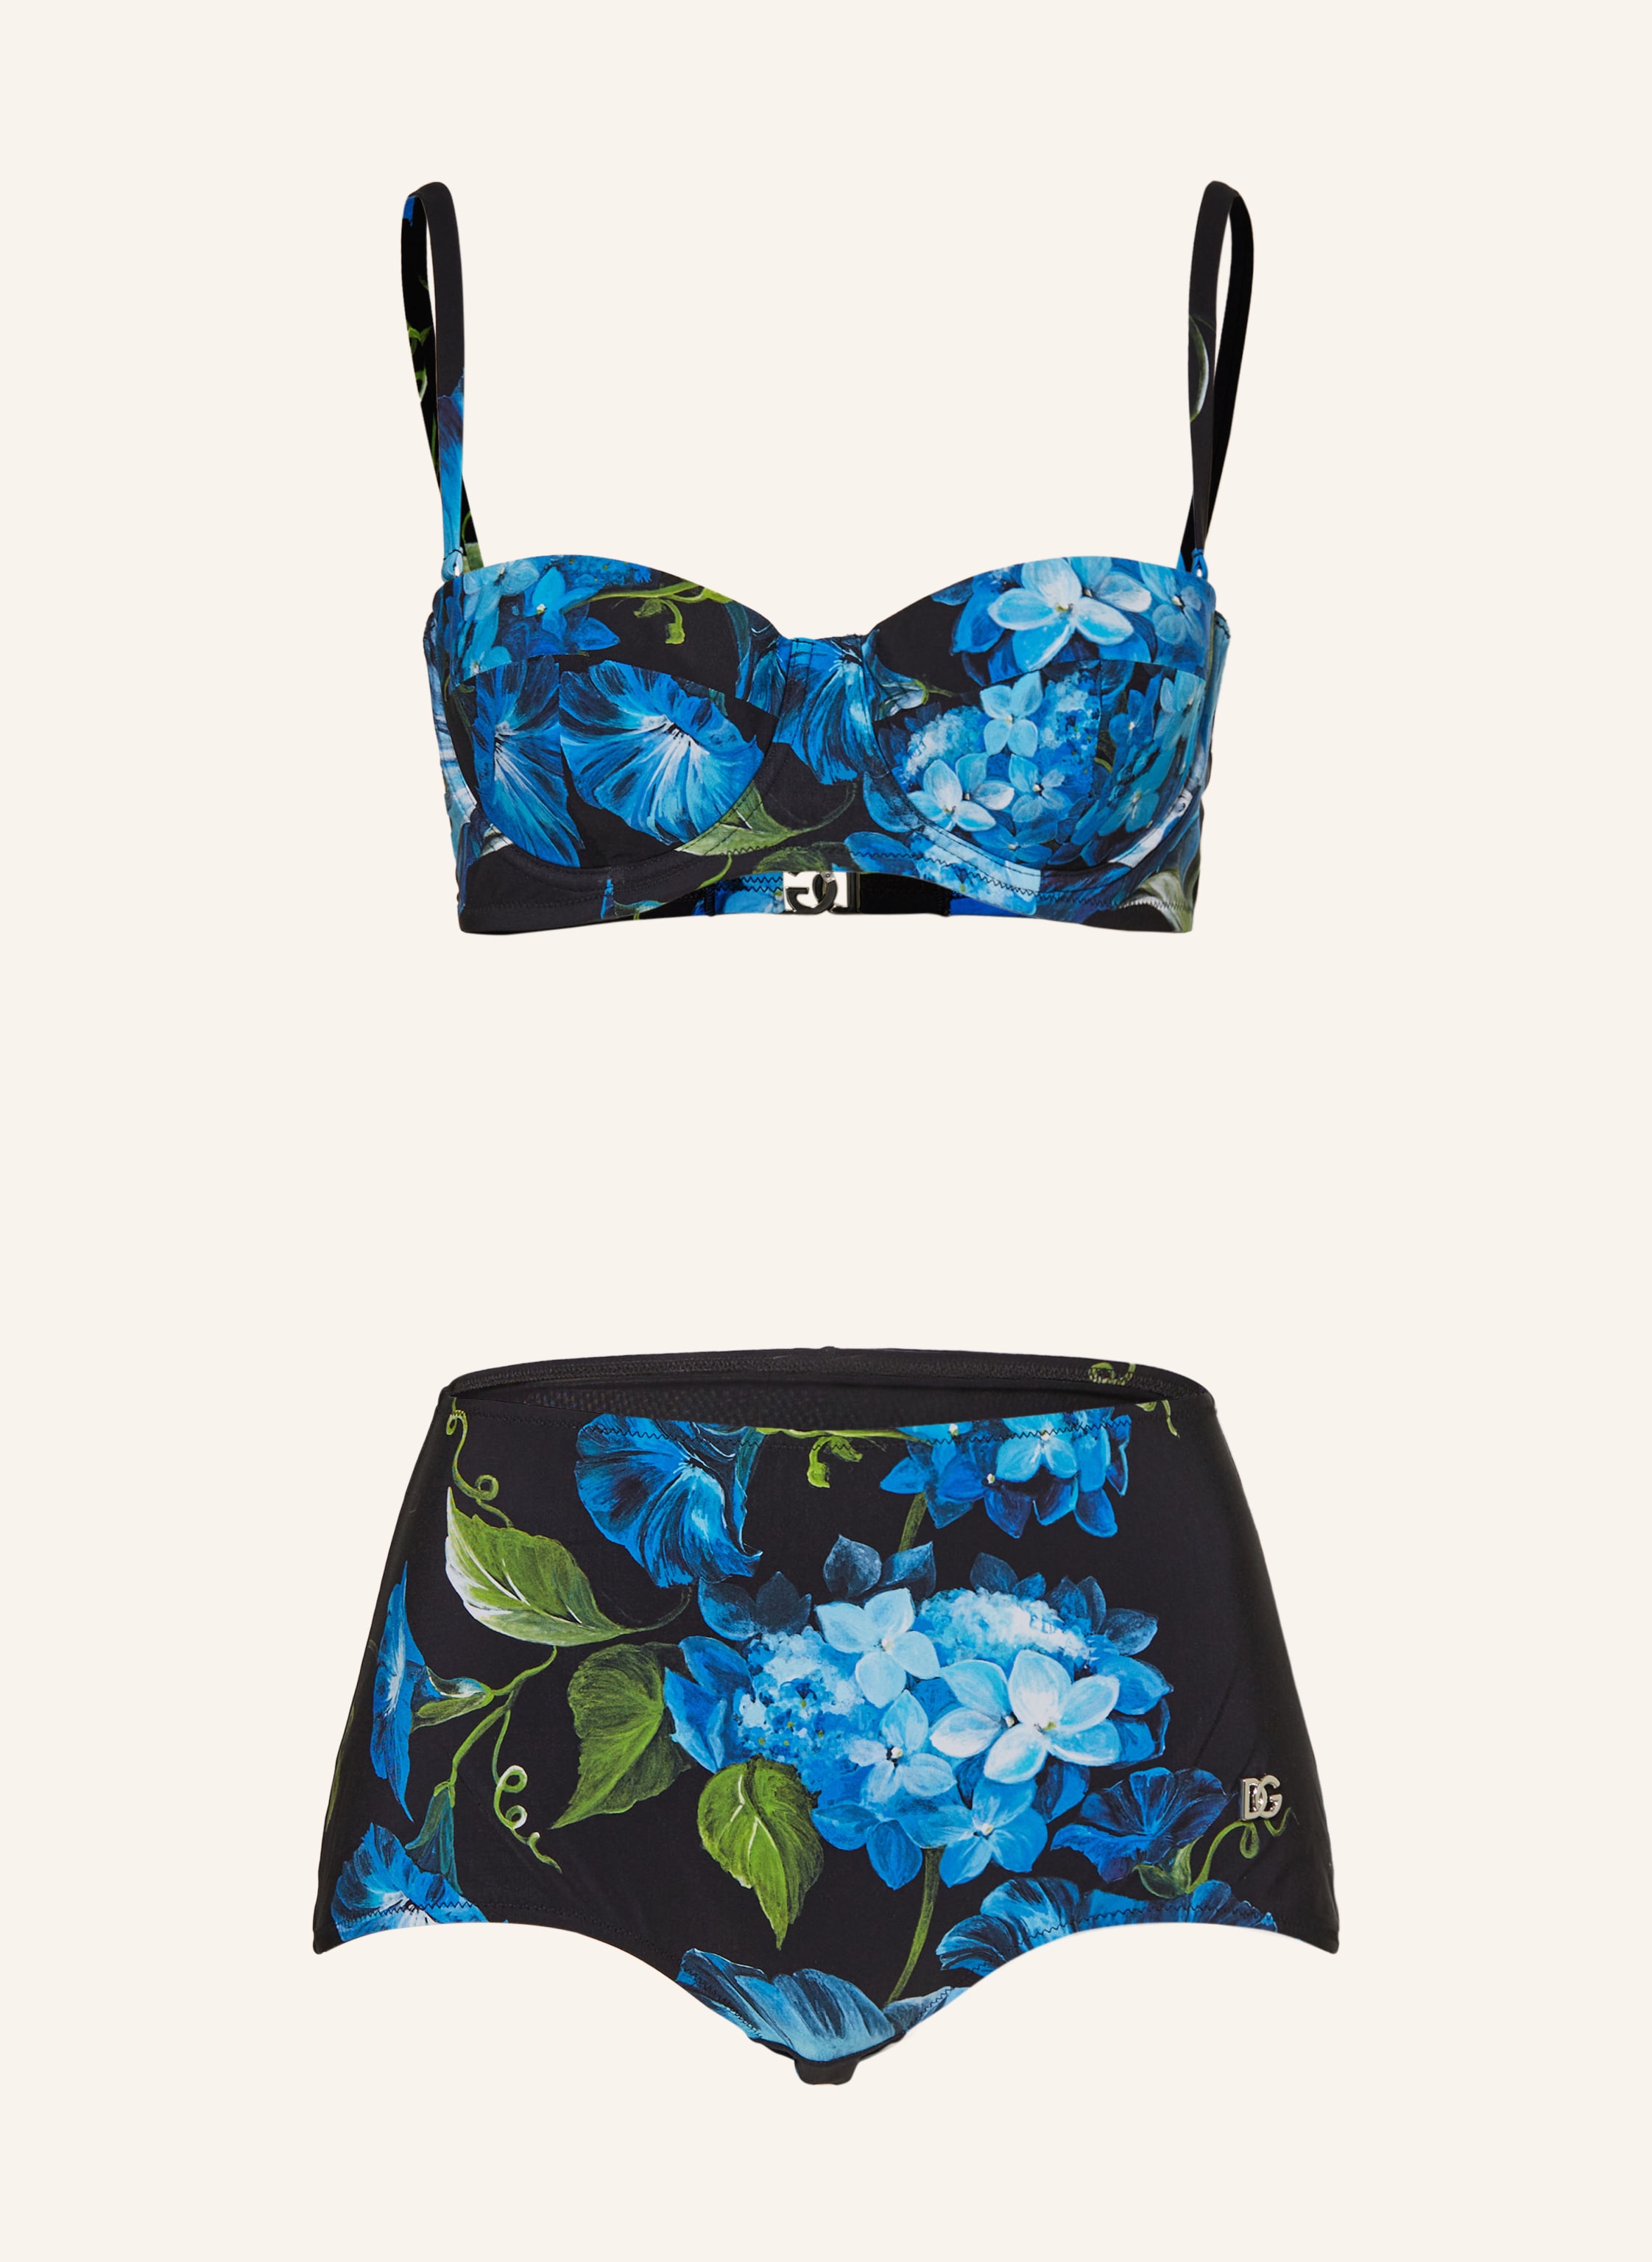 Buy B by Ted Baker Black Floral Padded Bra from Next Luxembourg